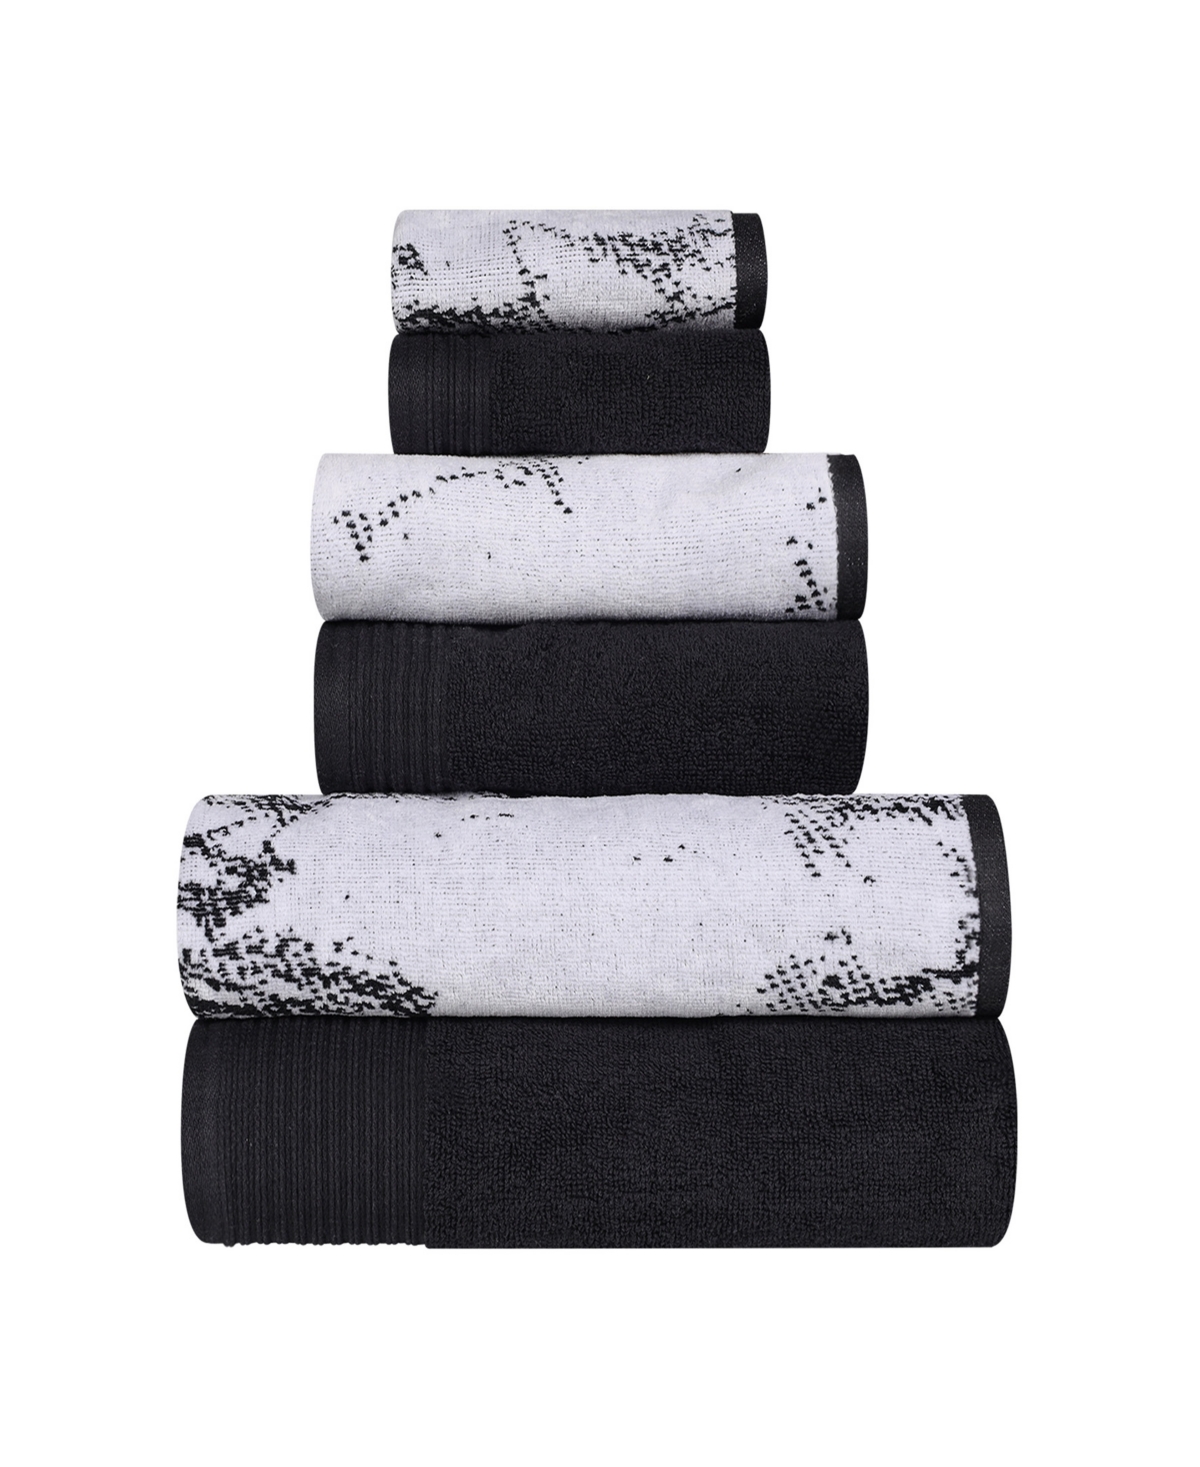 Superior Quick Drying Cotton Solid And Marble Effect 6 Piece Towel Set In Black